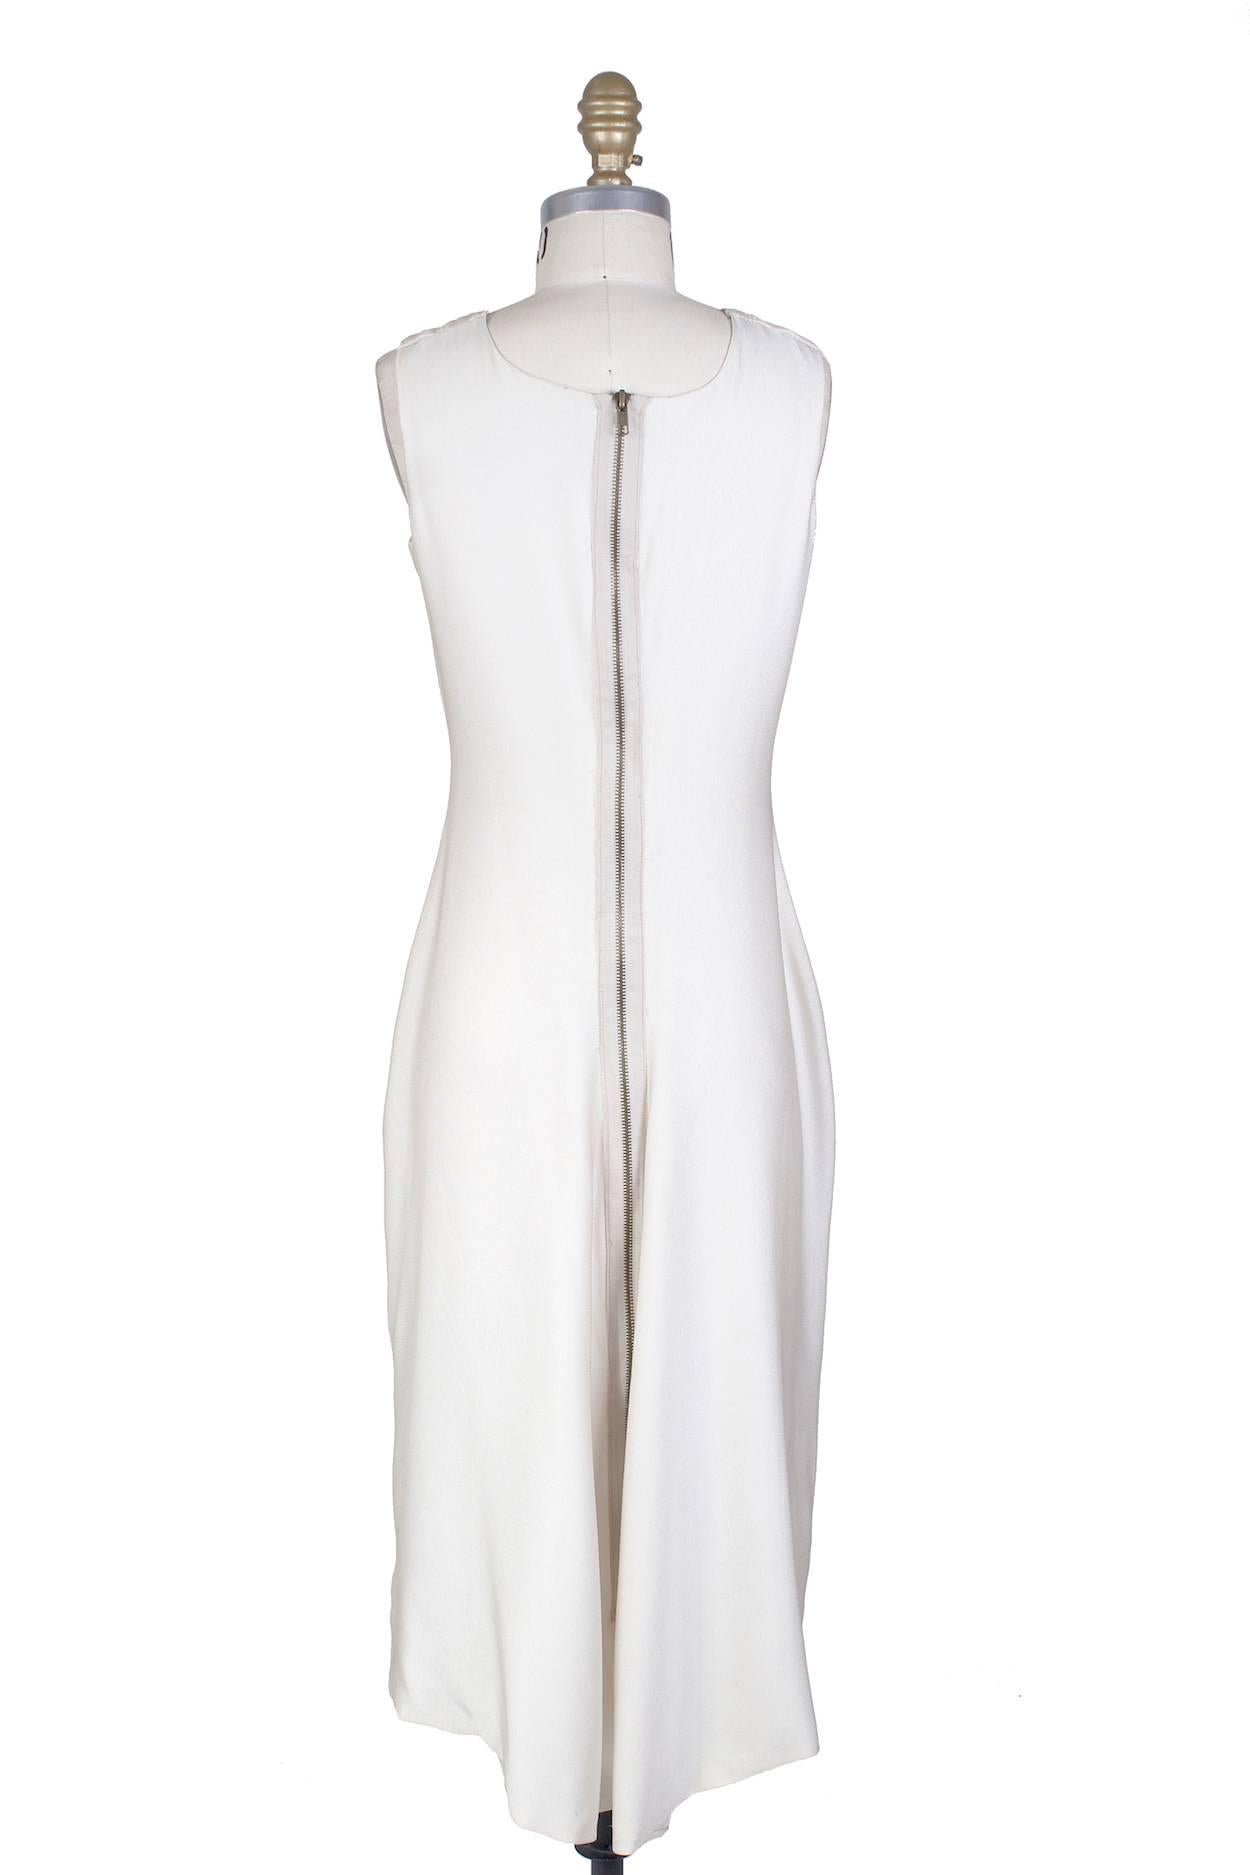 This dress is 1 of 2 ever made. It was Look 22 worn by Stella Tennant in the Spring 1996 Ready to Wear 